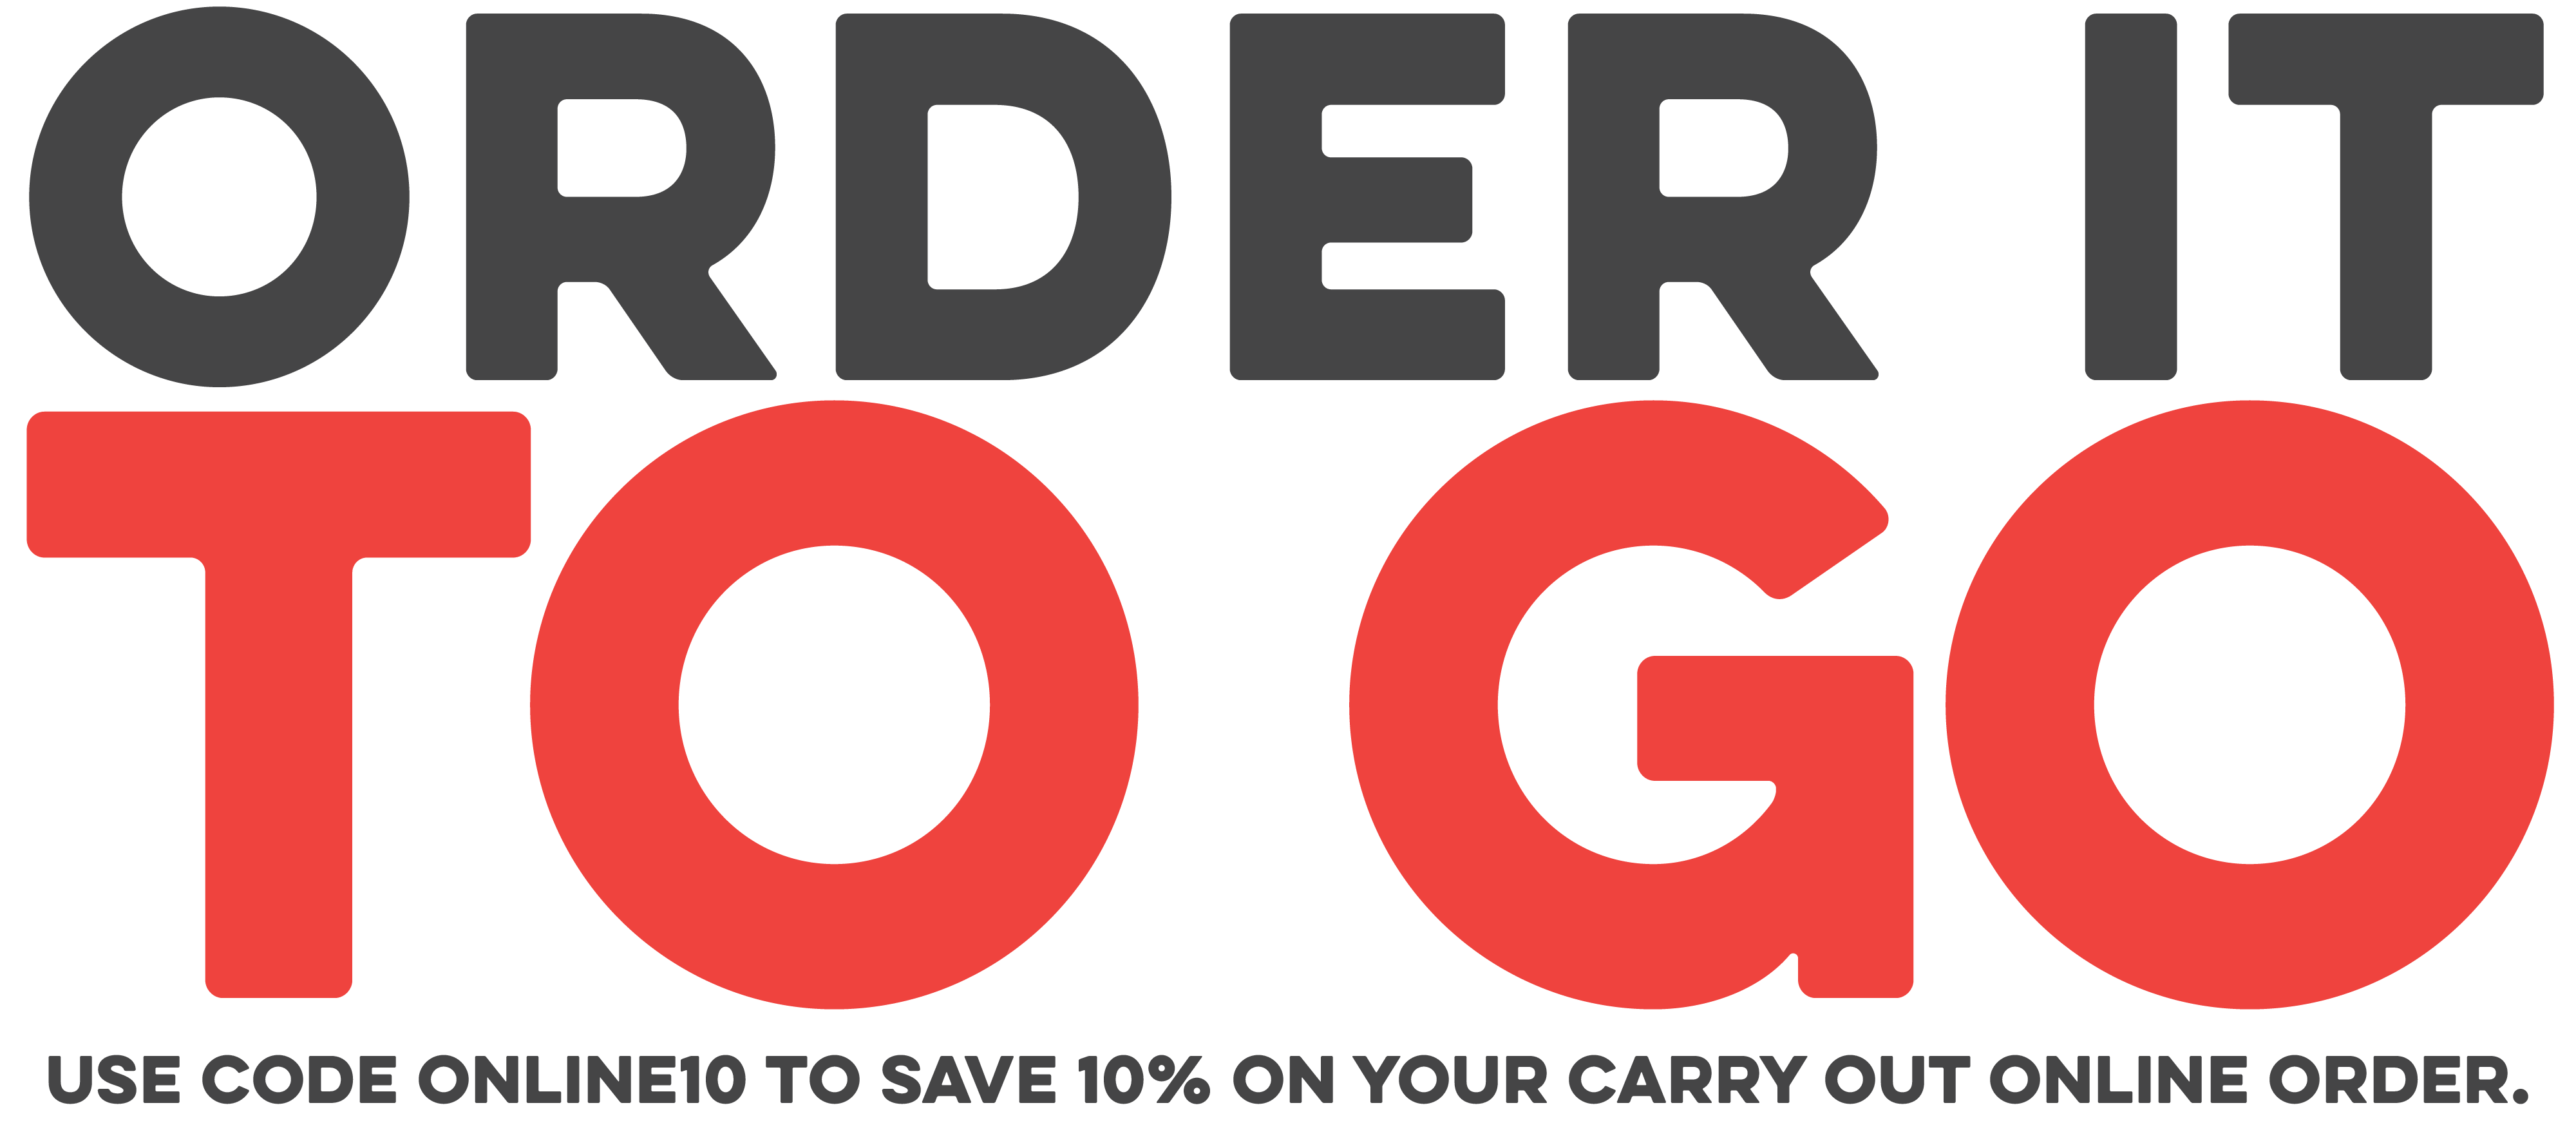 Order it to go. Use code ONLINE10 to save 10% on your carry out online order.